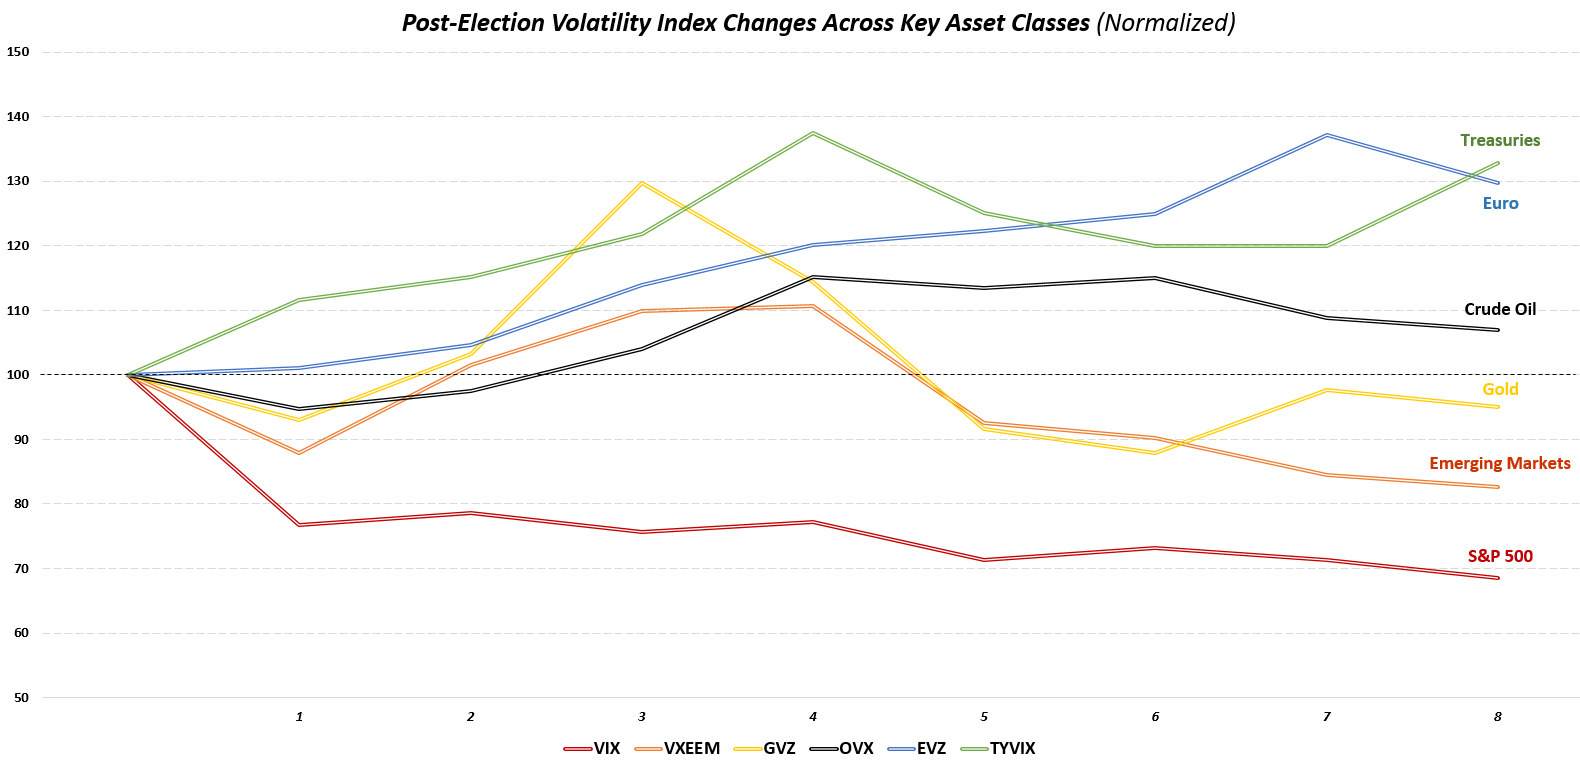 Vol Indices Following The Election